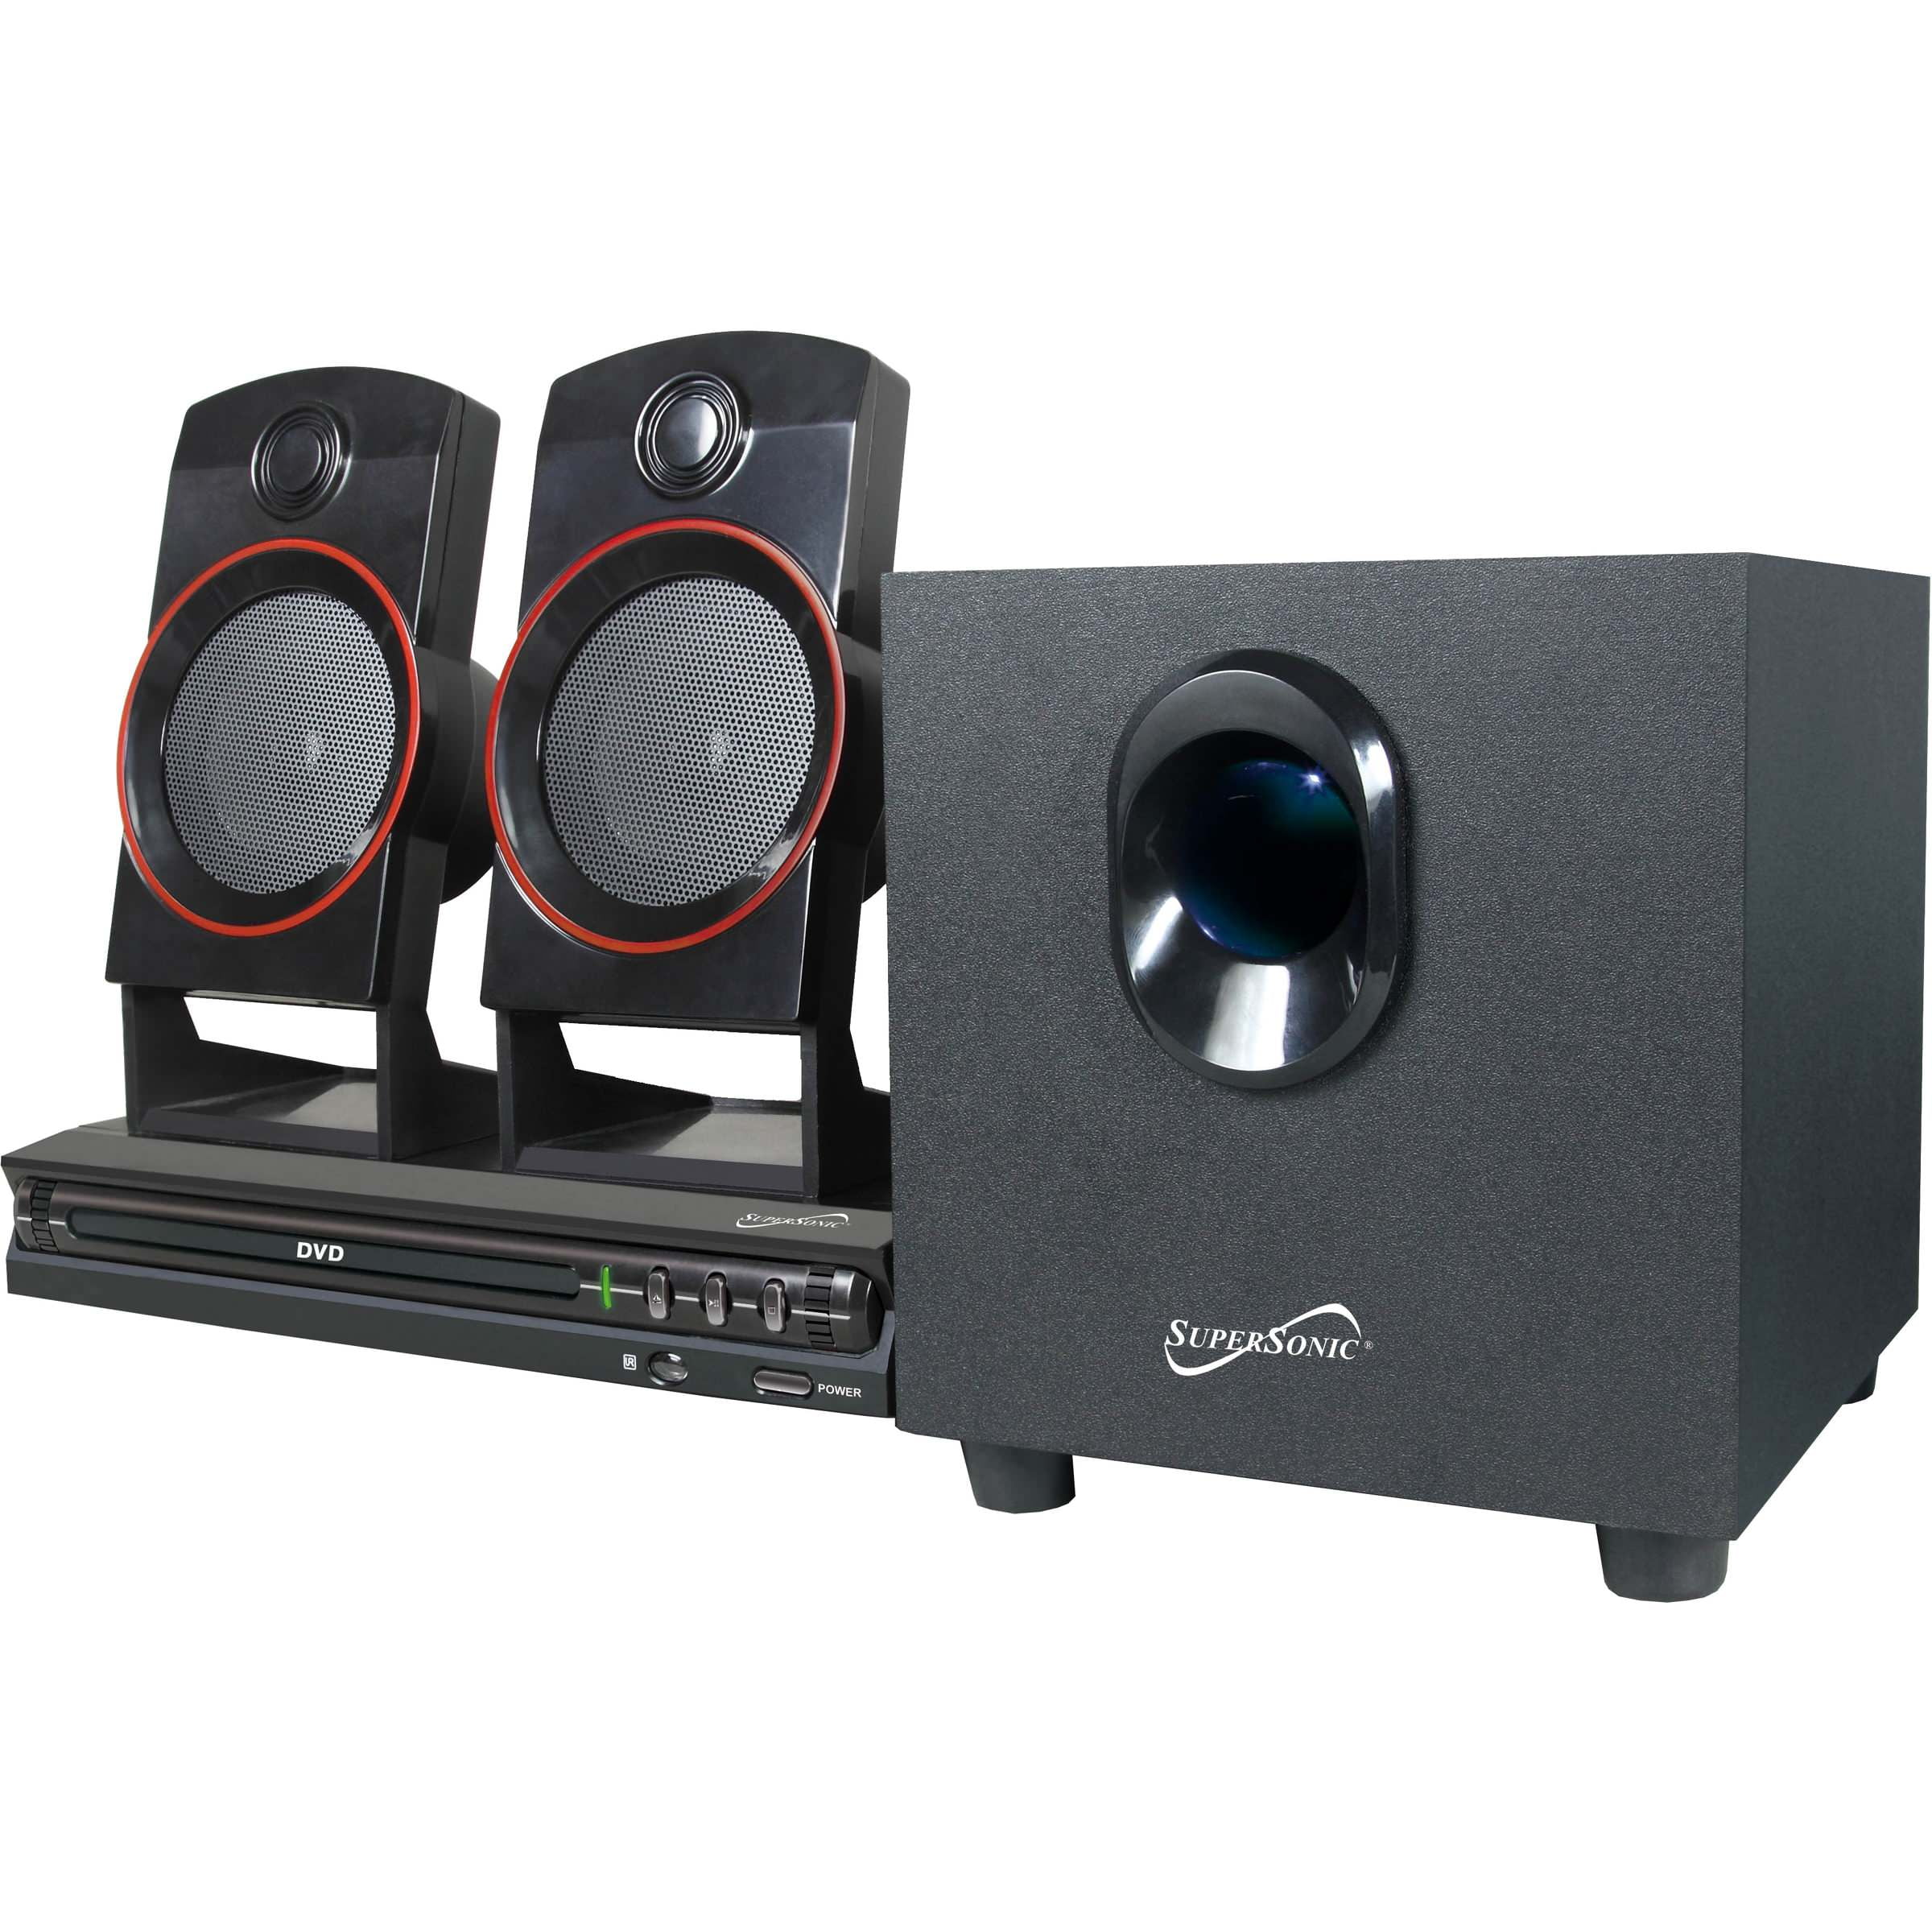 2.1 Channel DVD Home Theater System -